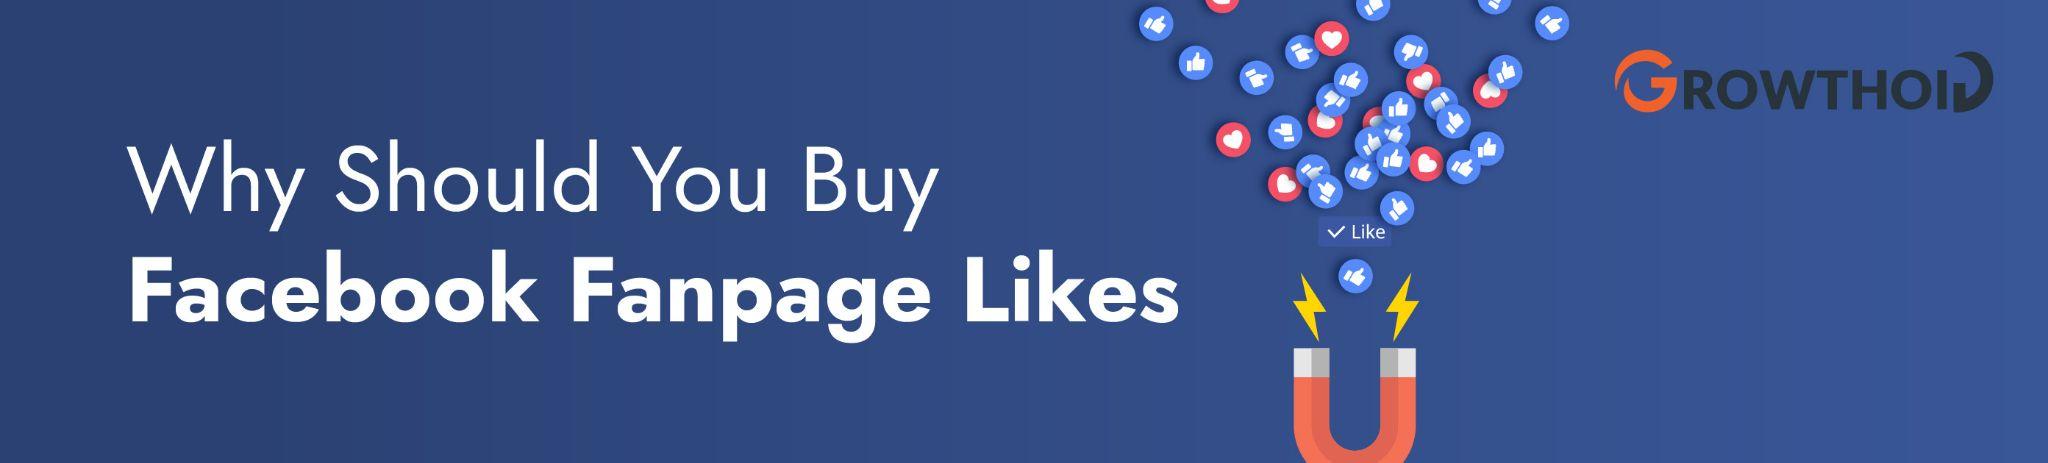 Why Should You Buy Facebook Fanpage Likes